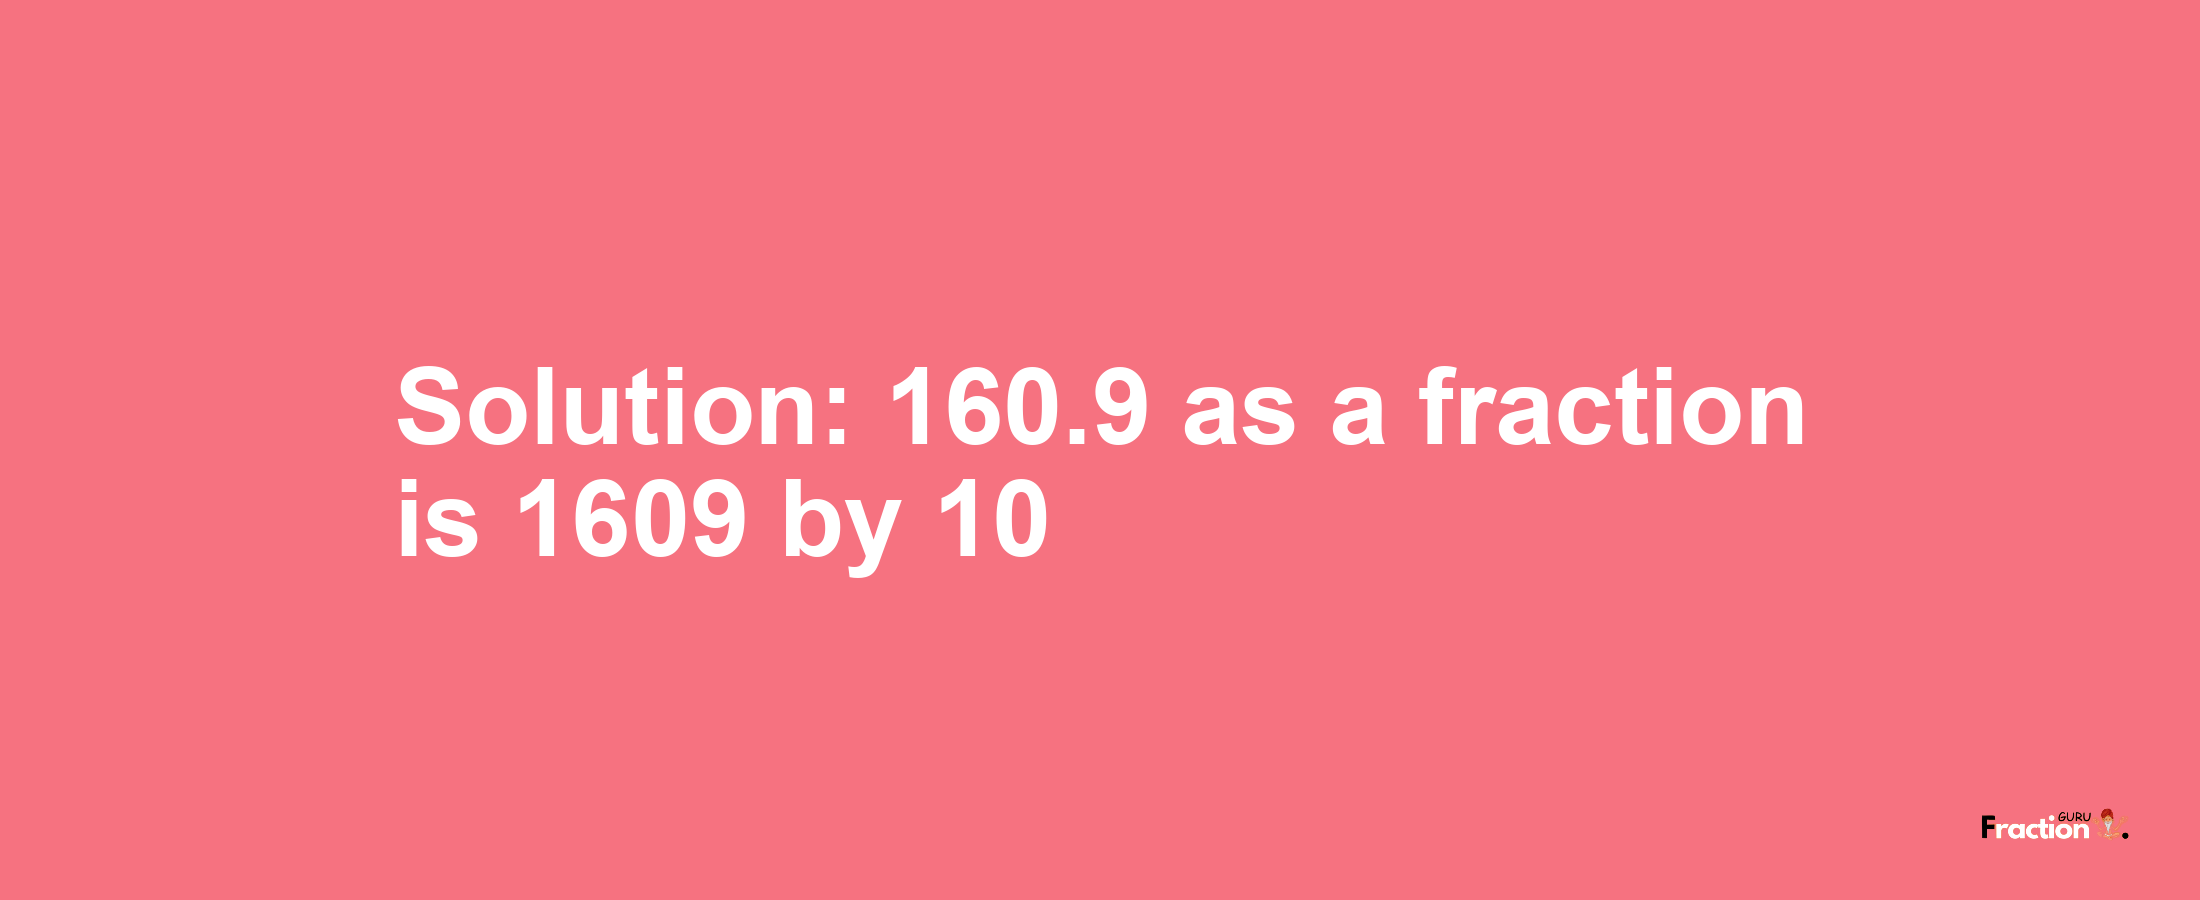 Solution:160.9 as a fraction is 1609/10